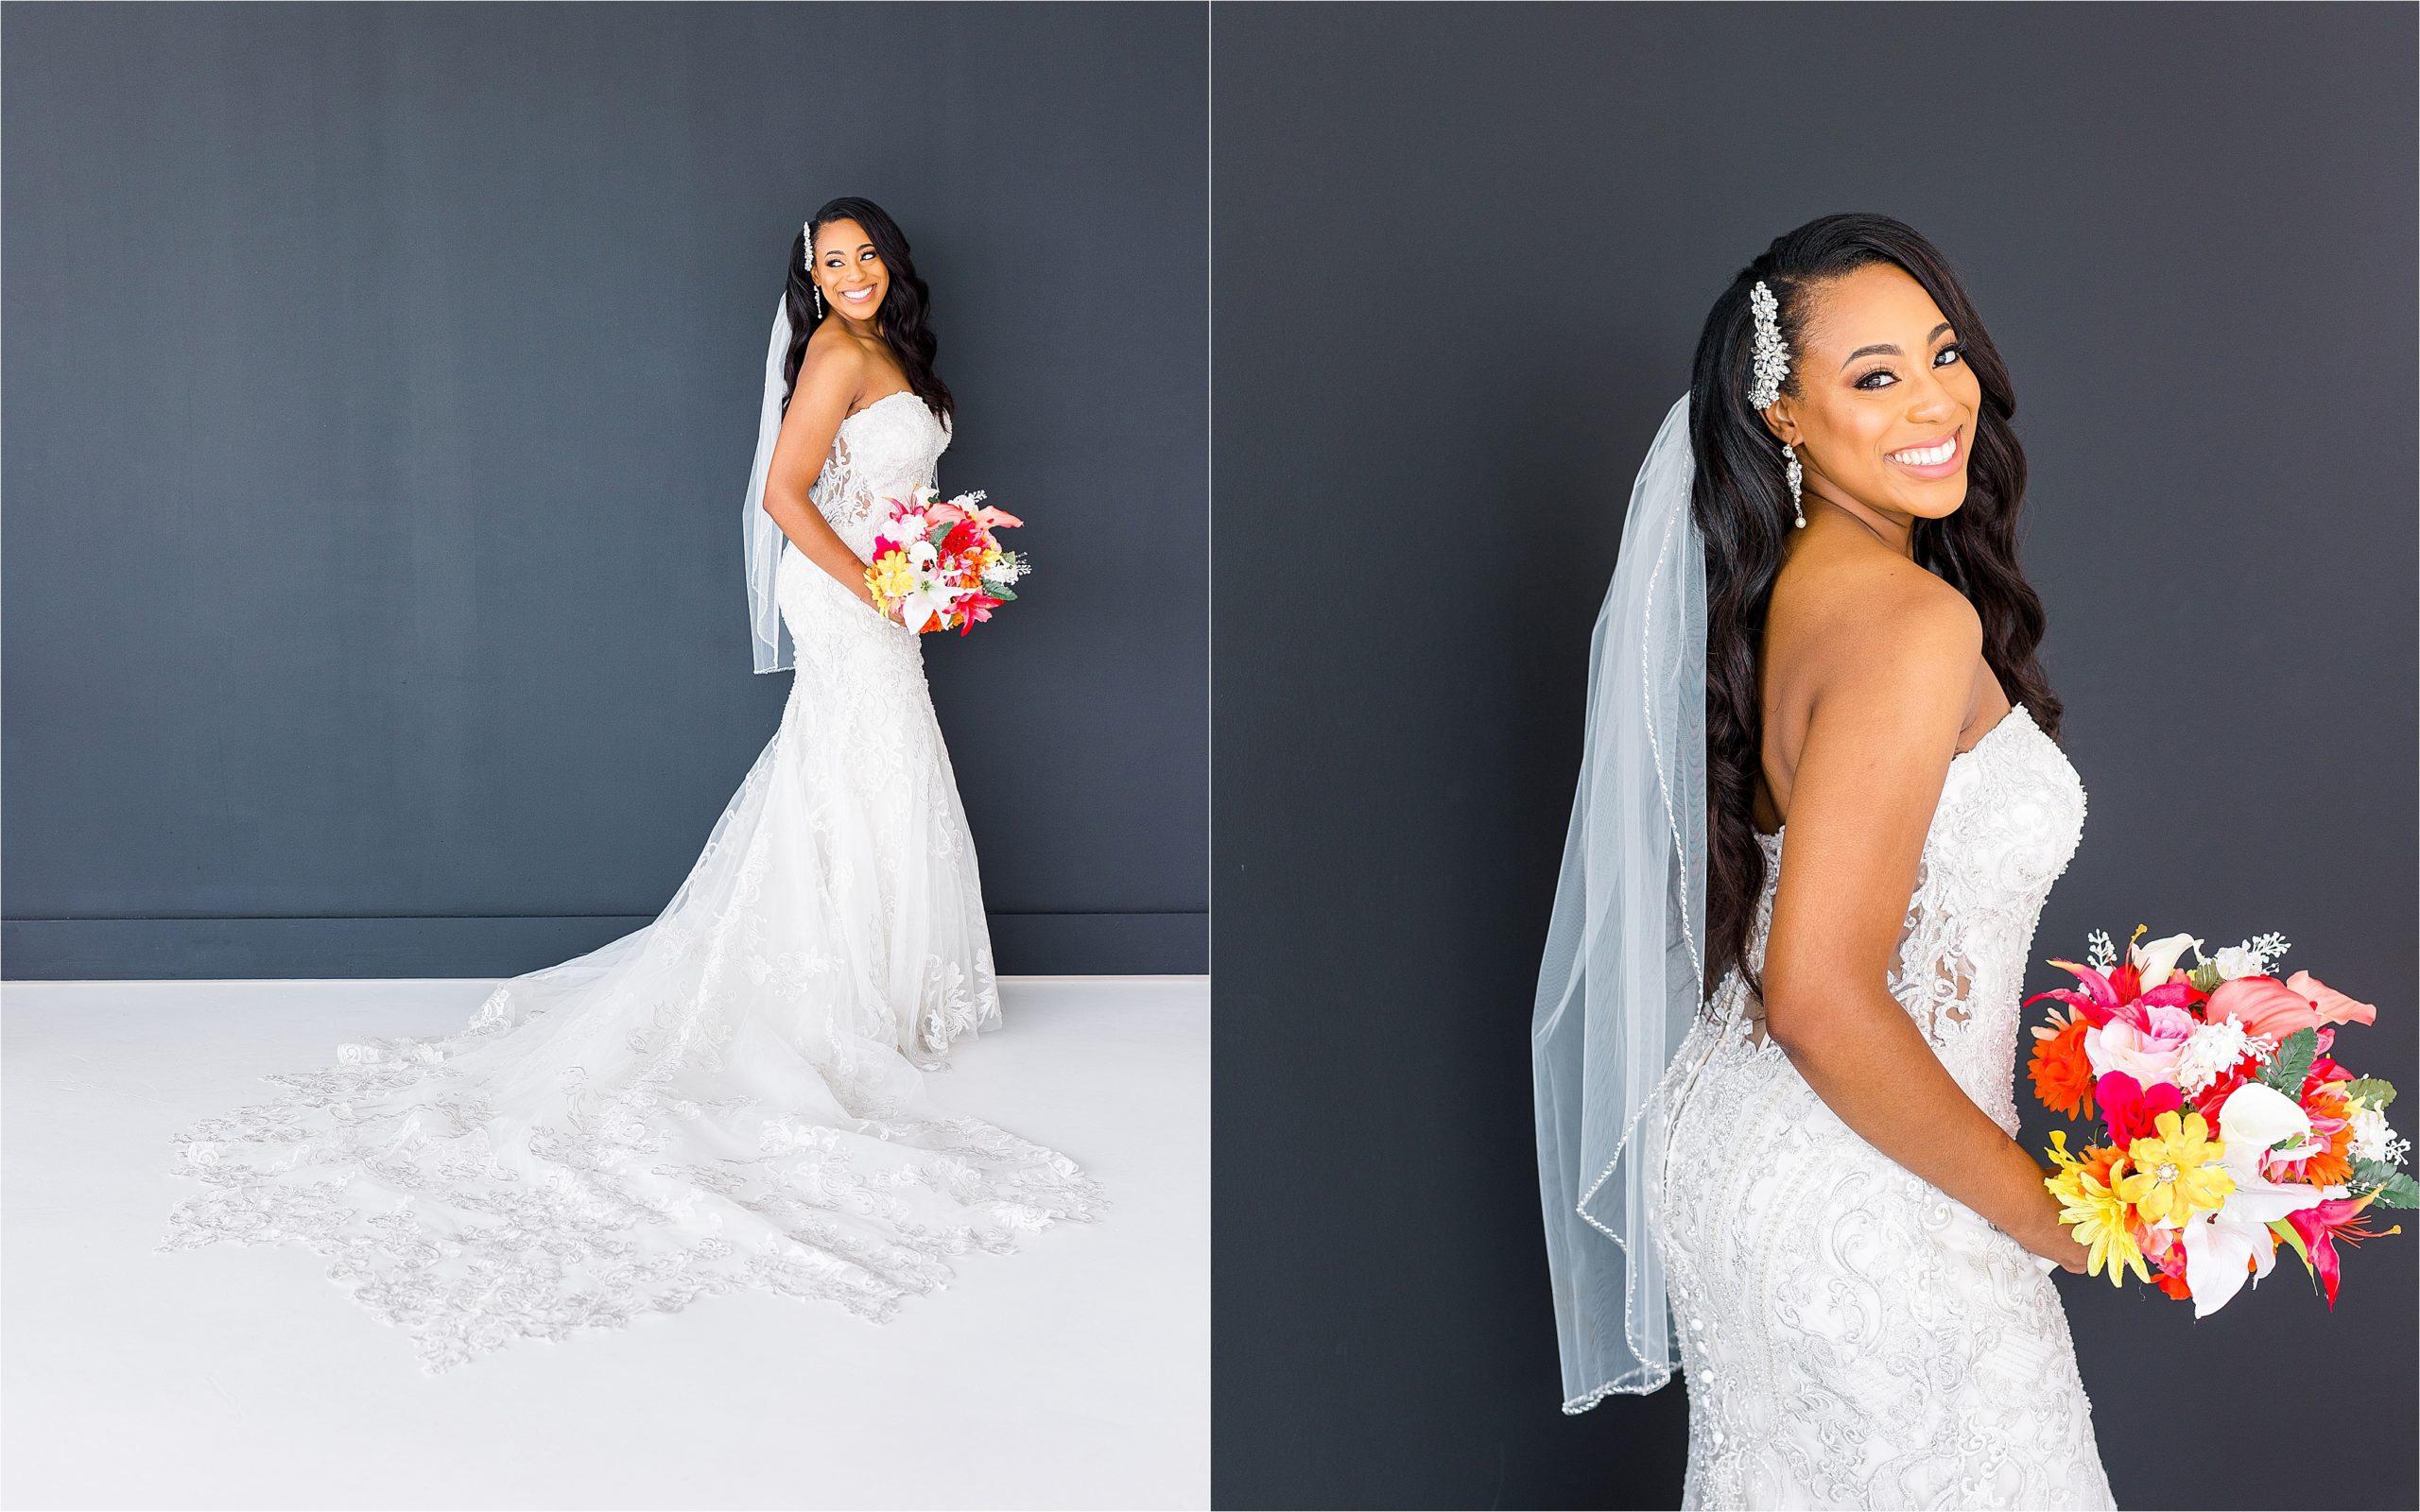 A bride to be smiles over her shoulders with her wedding veil behind her and holding a colorful bouquet in front of a black backdrop for her bridal portraits with San Antonio Wedding Photographer Jillian Hogan 